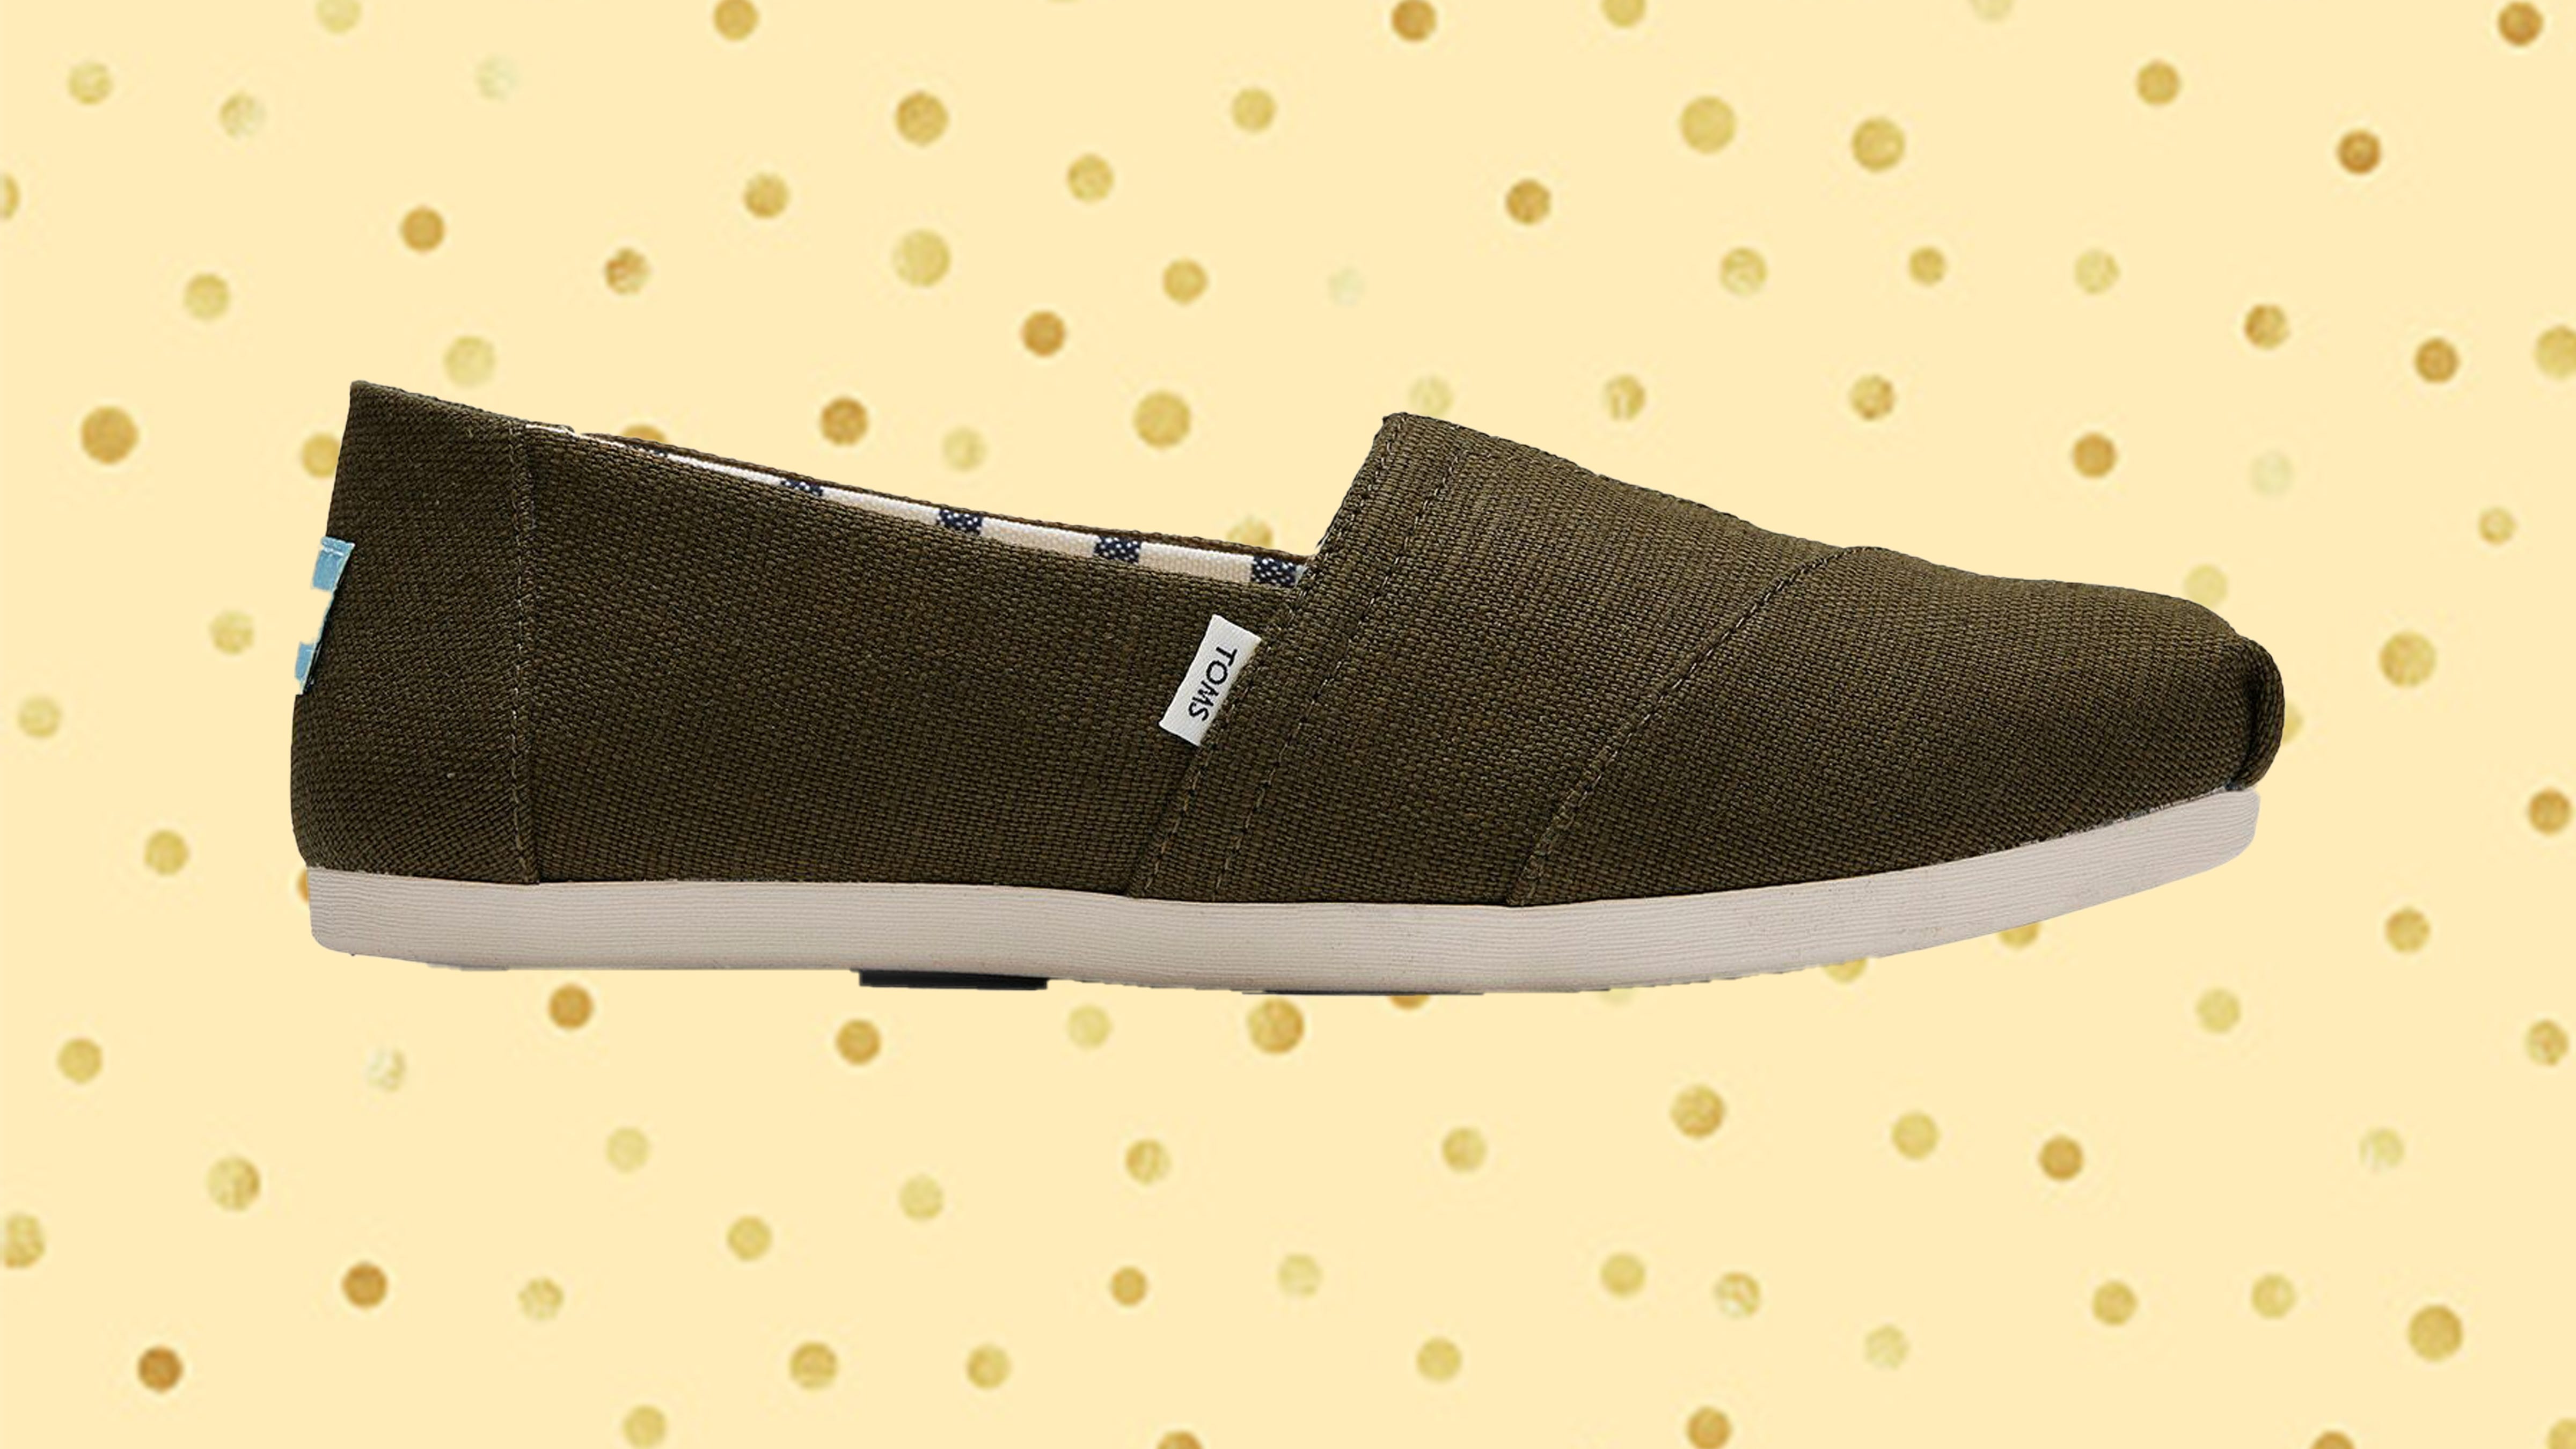 TOMS promo code: Get a discount on 